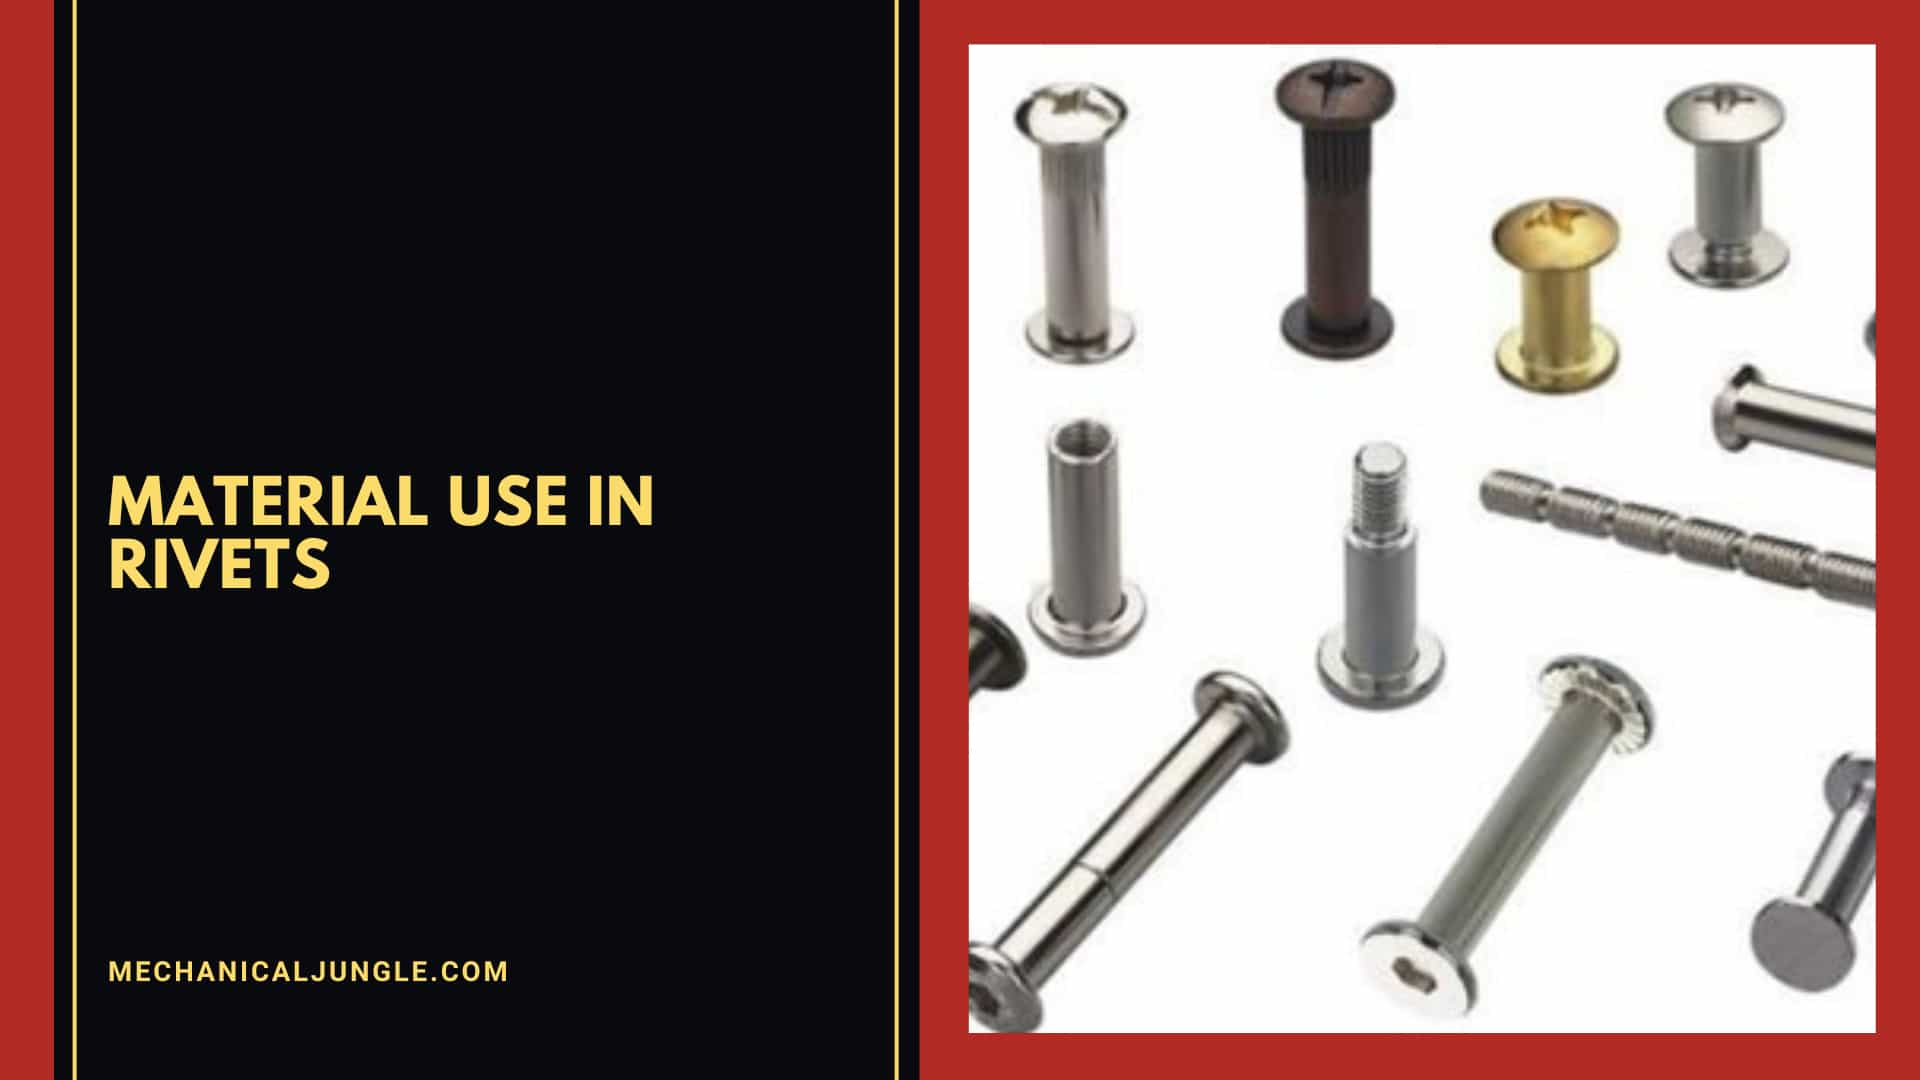 Material Use in Rivets: